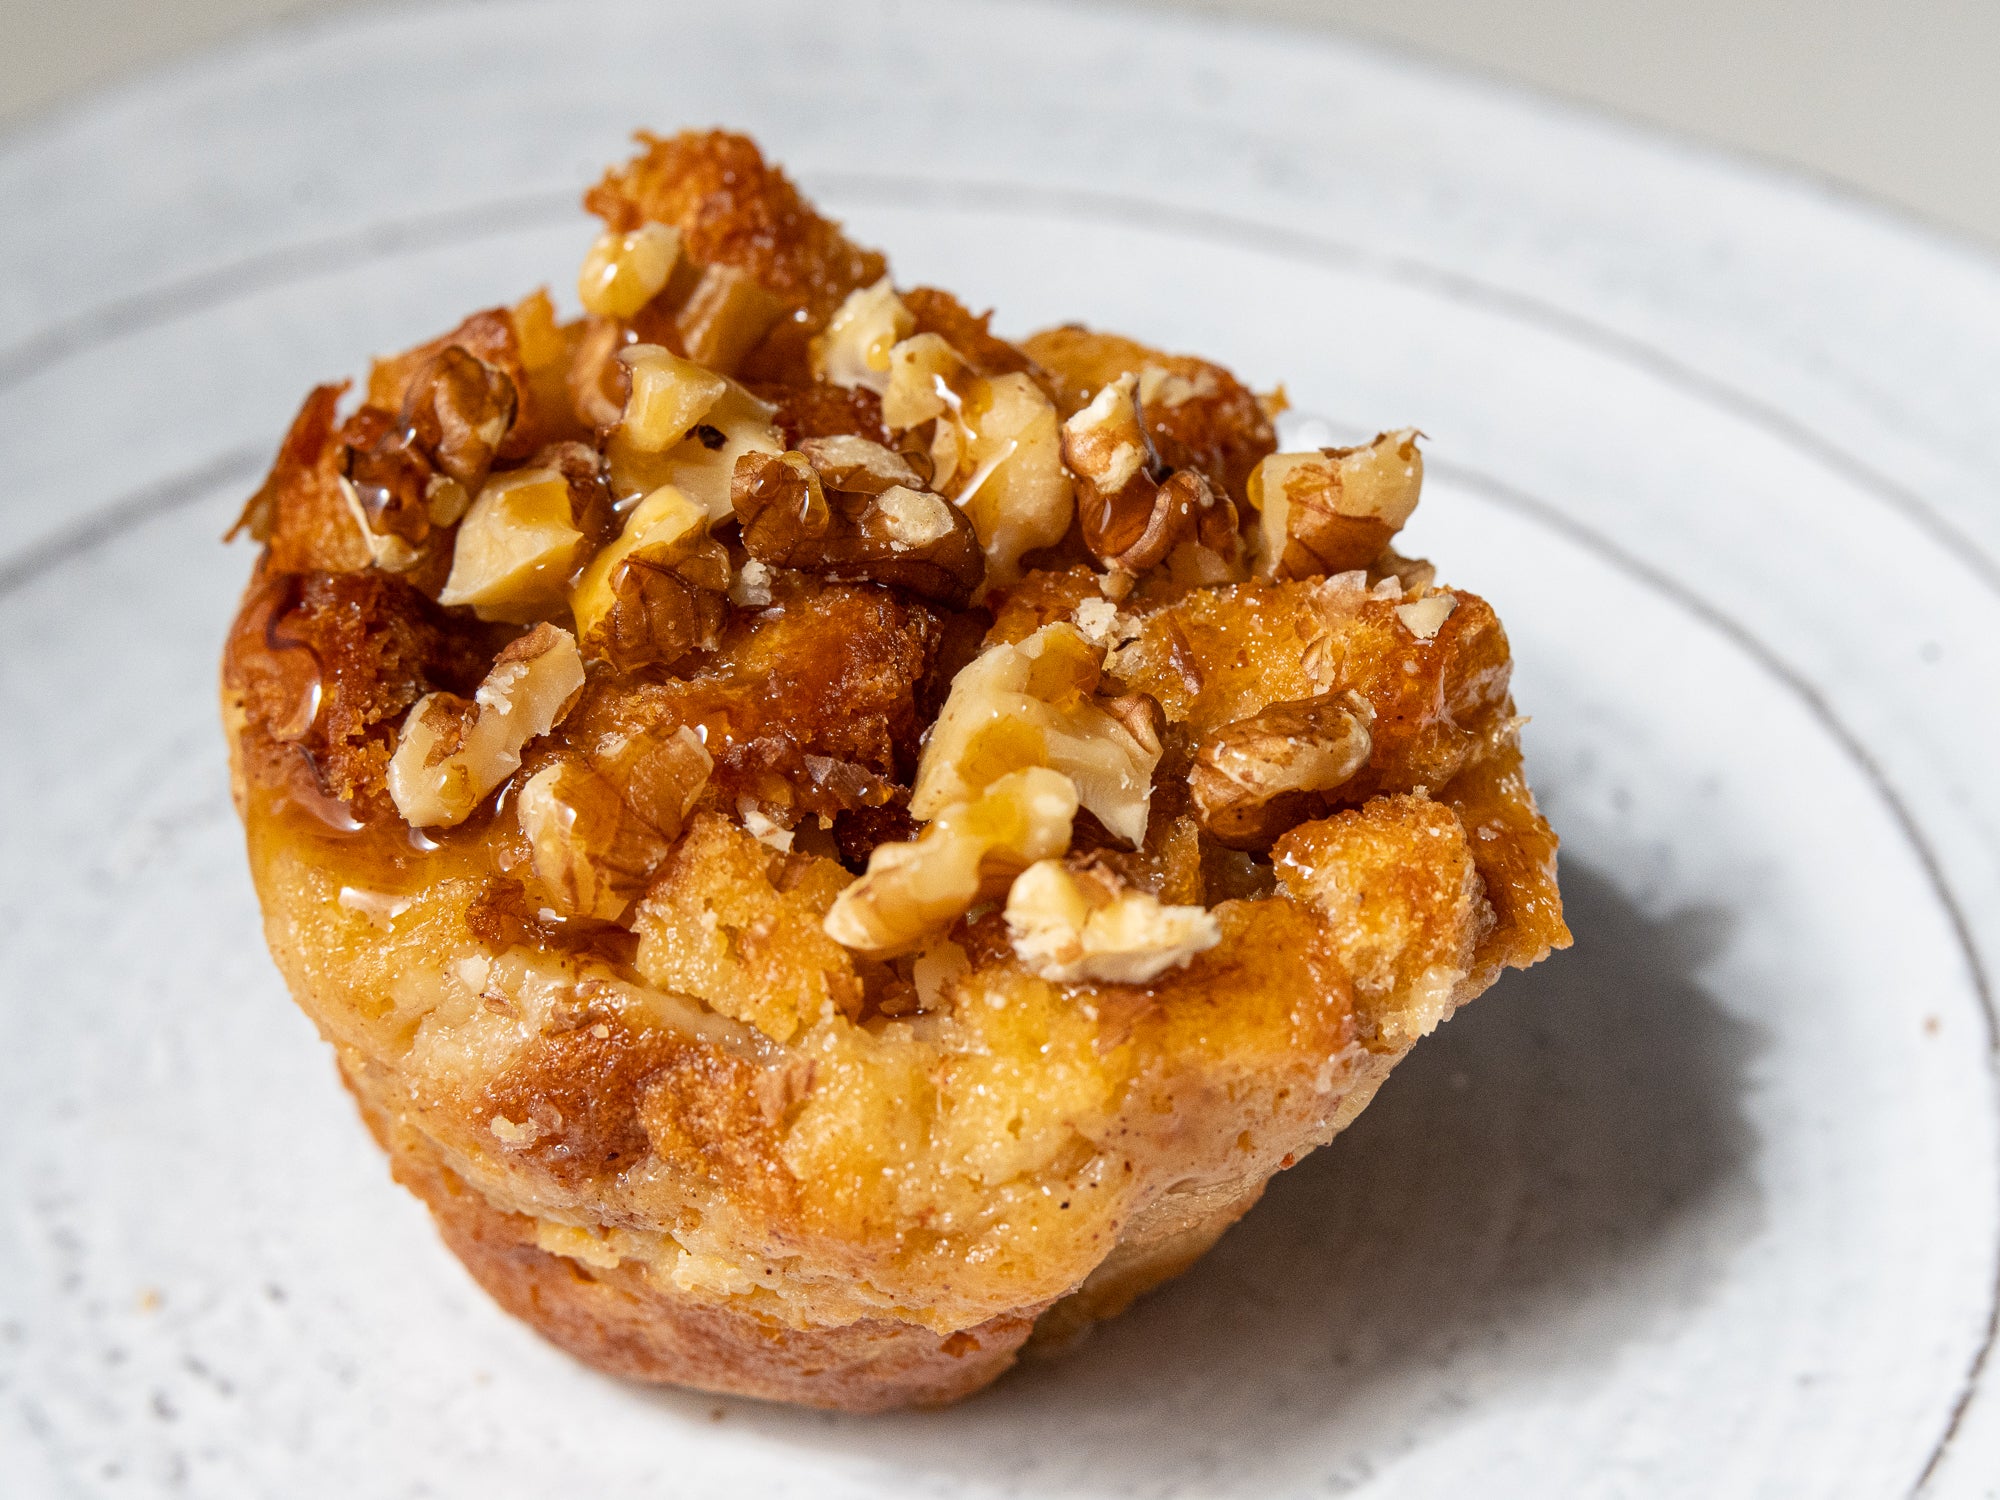 Bread pudding topped with walnuts and caramel